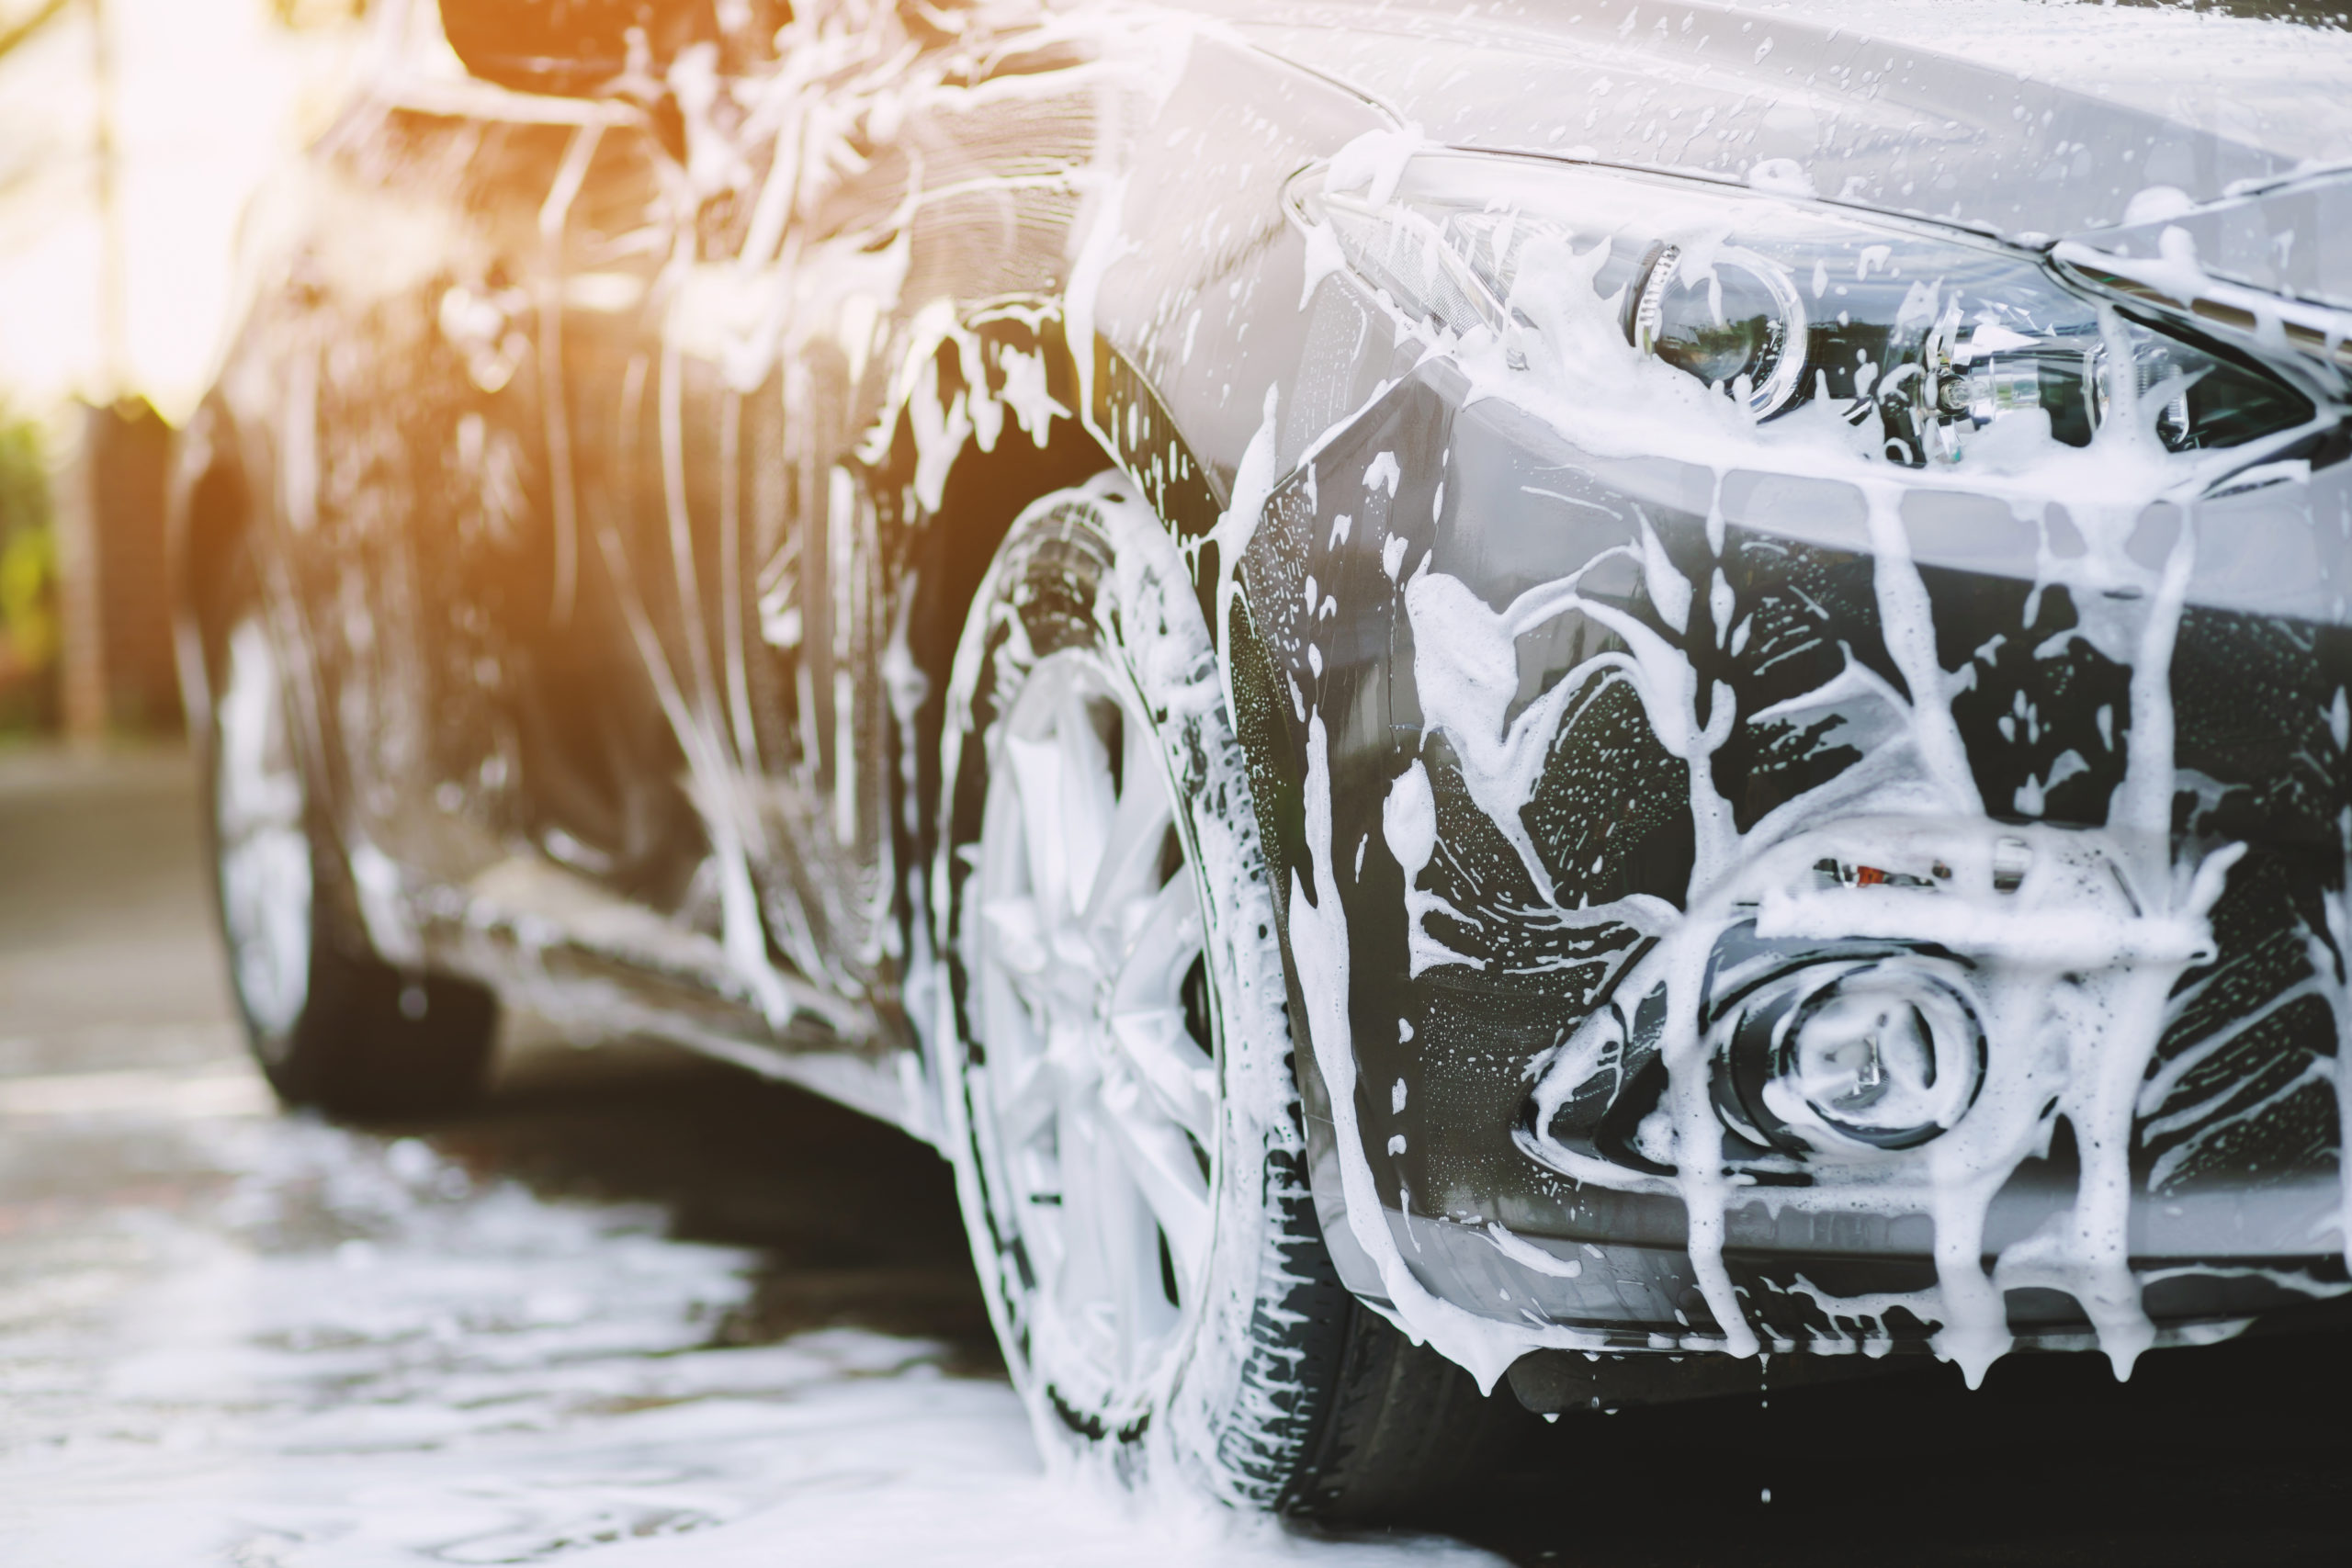 Exterior Car Detailing: 14 Steps to Clean Your Car Like a Pro - Autotrader